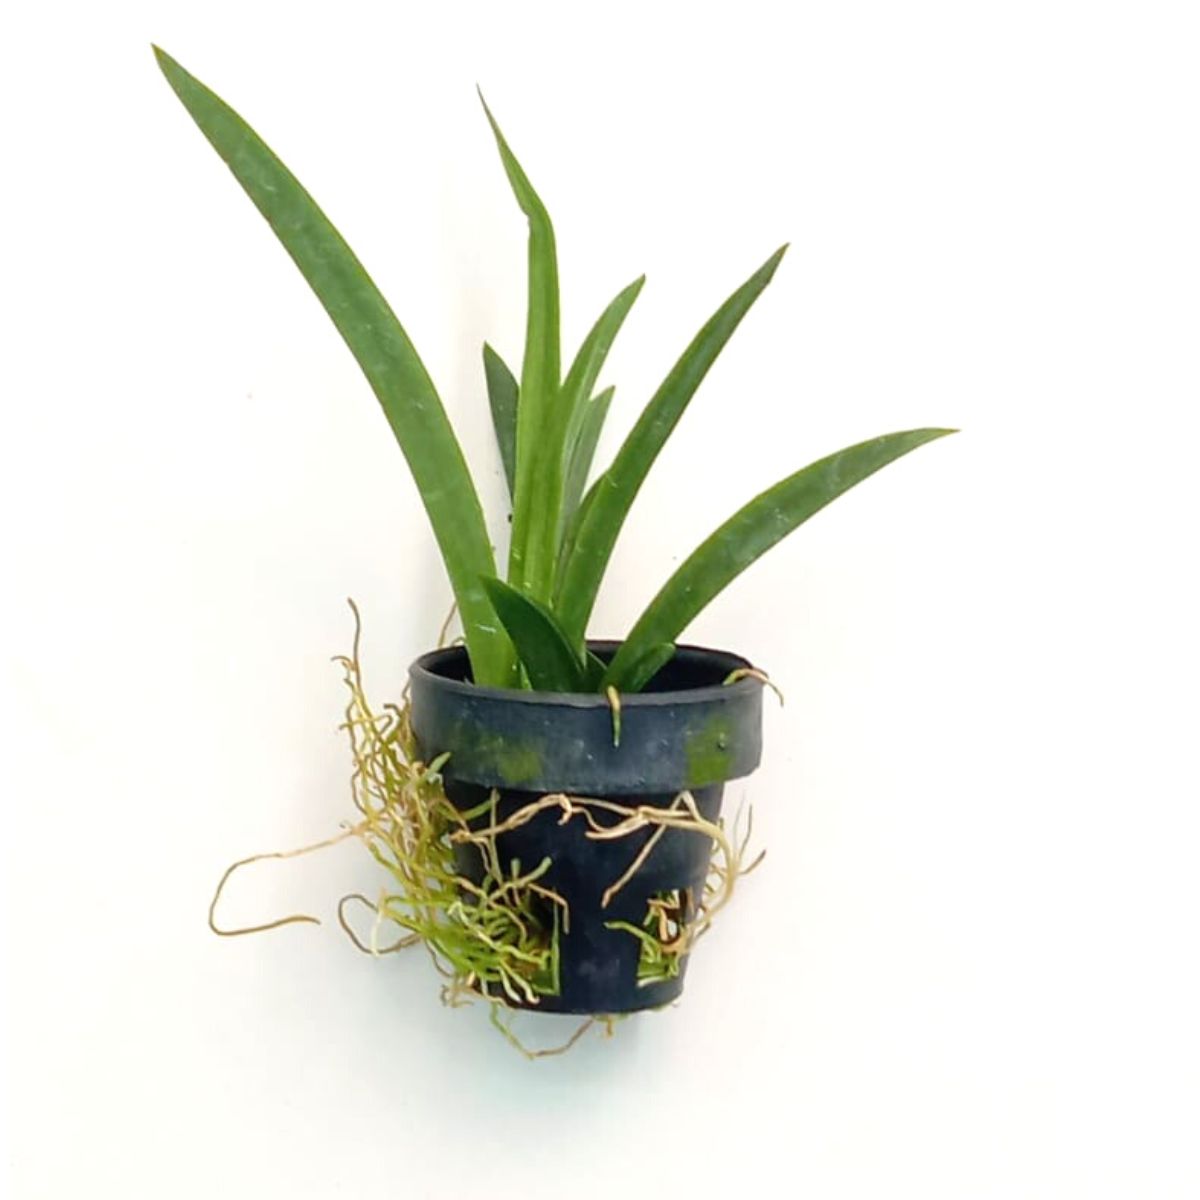 Tolumnia Jairak Firm Fine Point Orchid Blooming Live Plant - Witness the Stunning Beauty of Delicately Patterned Blooms in Your Home